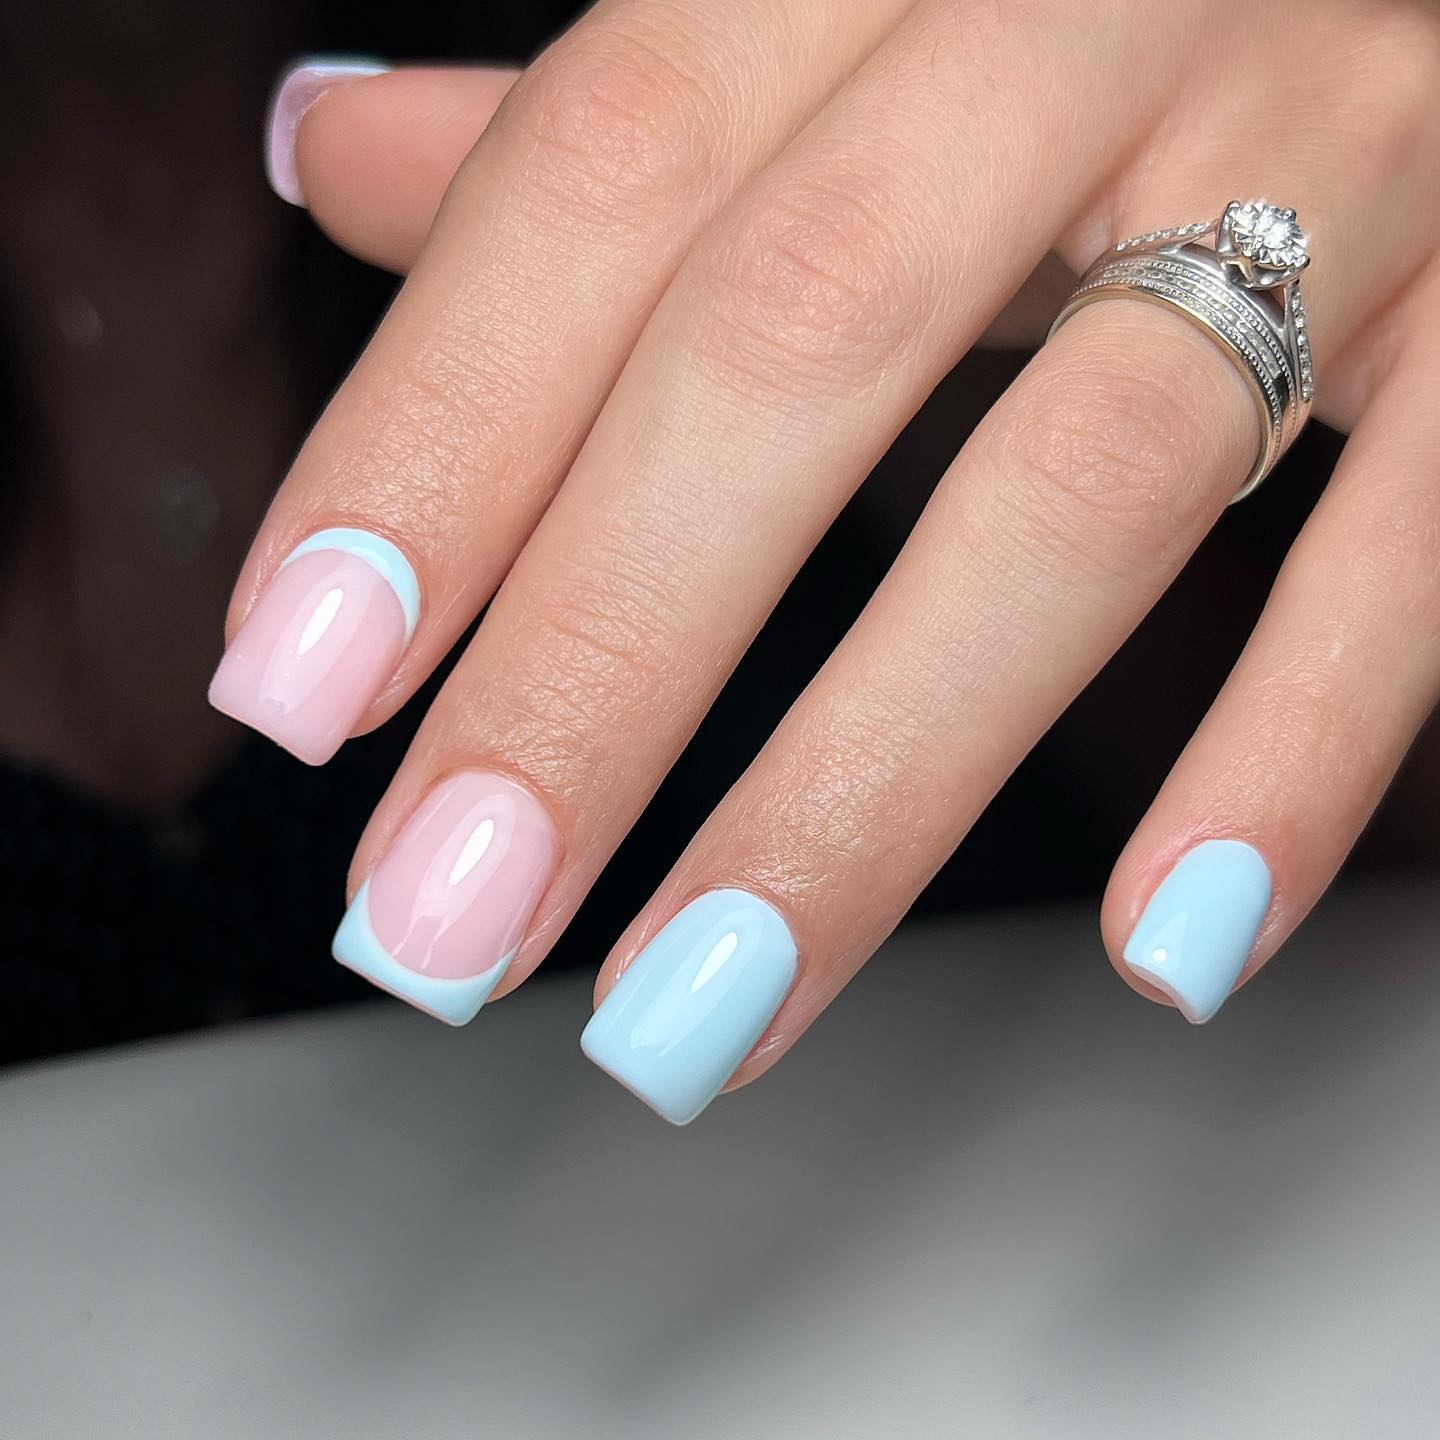 We all know about the colorful French tips, but have you ever tried the reverse one? The example above is a perfect one of it. Go for it if you want something new.